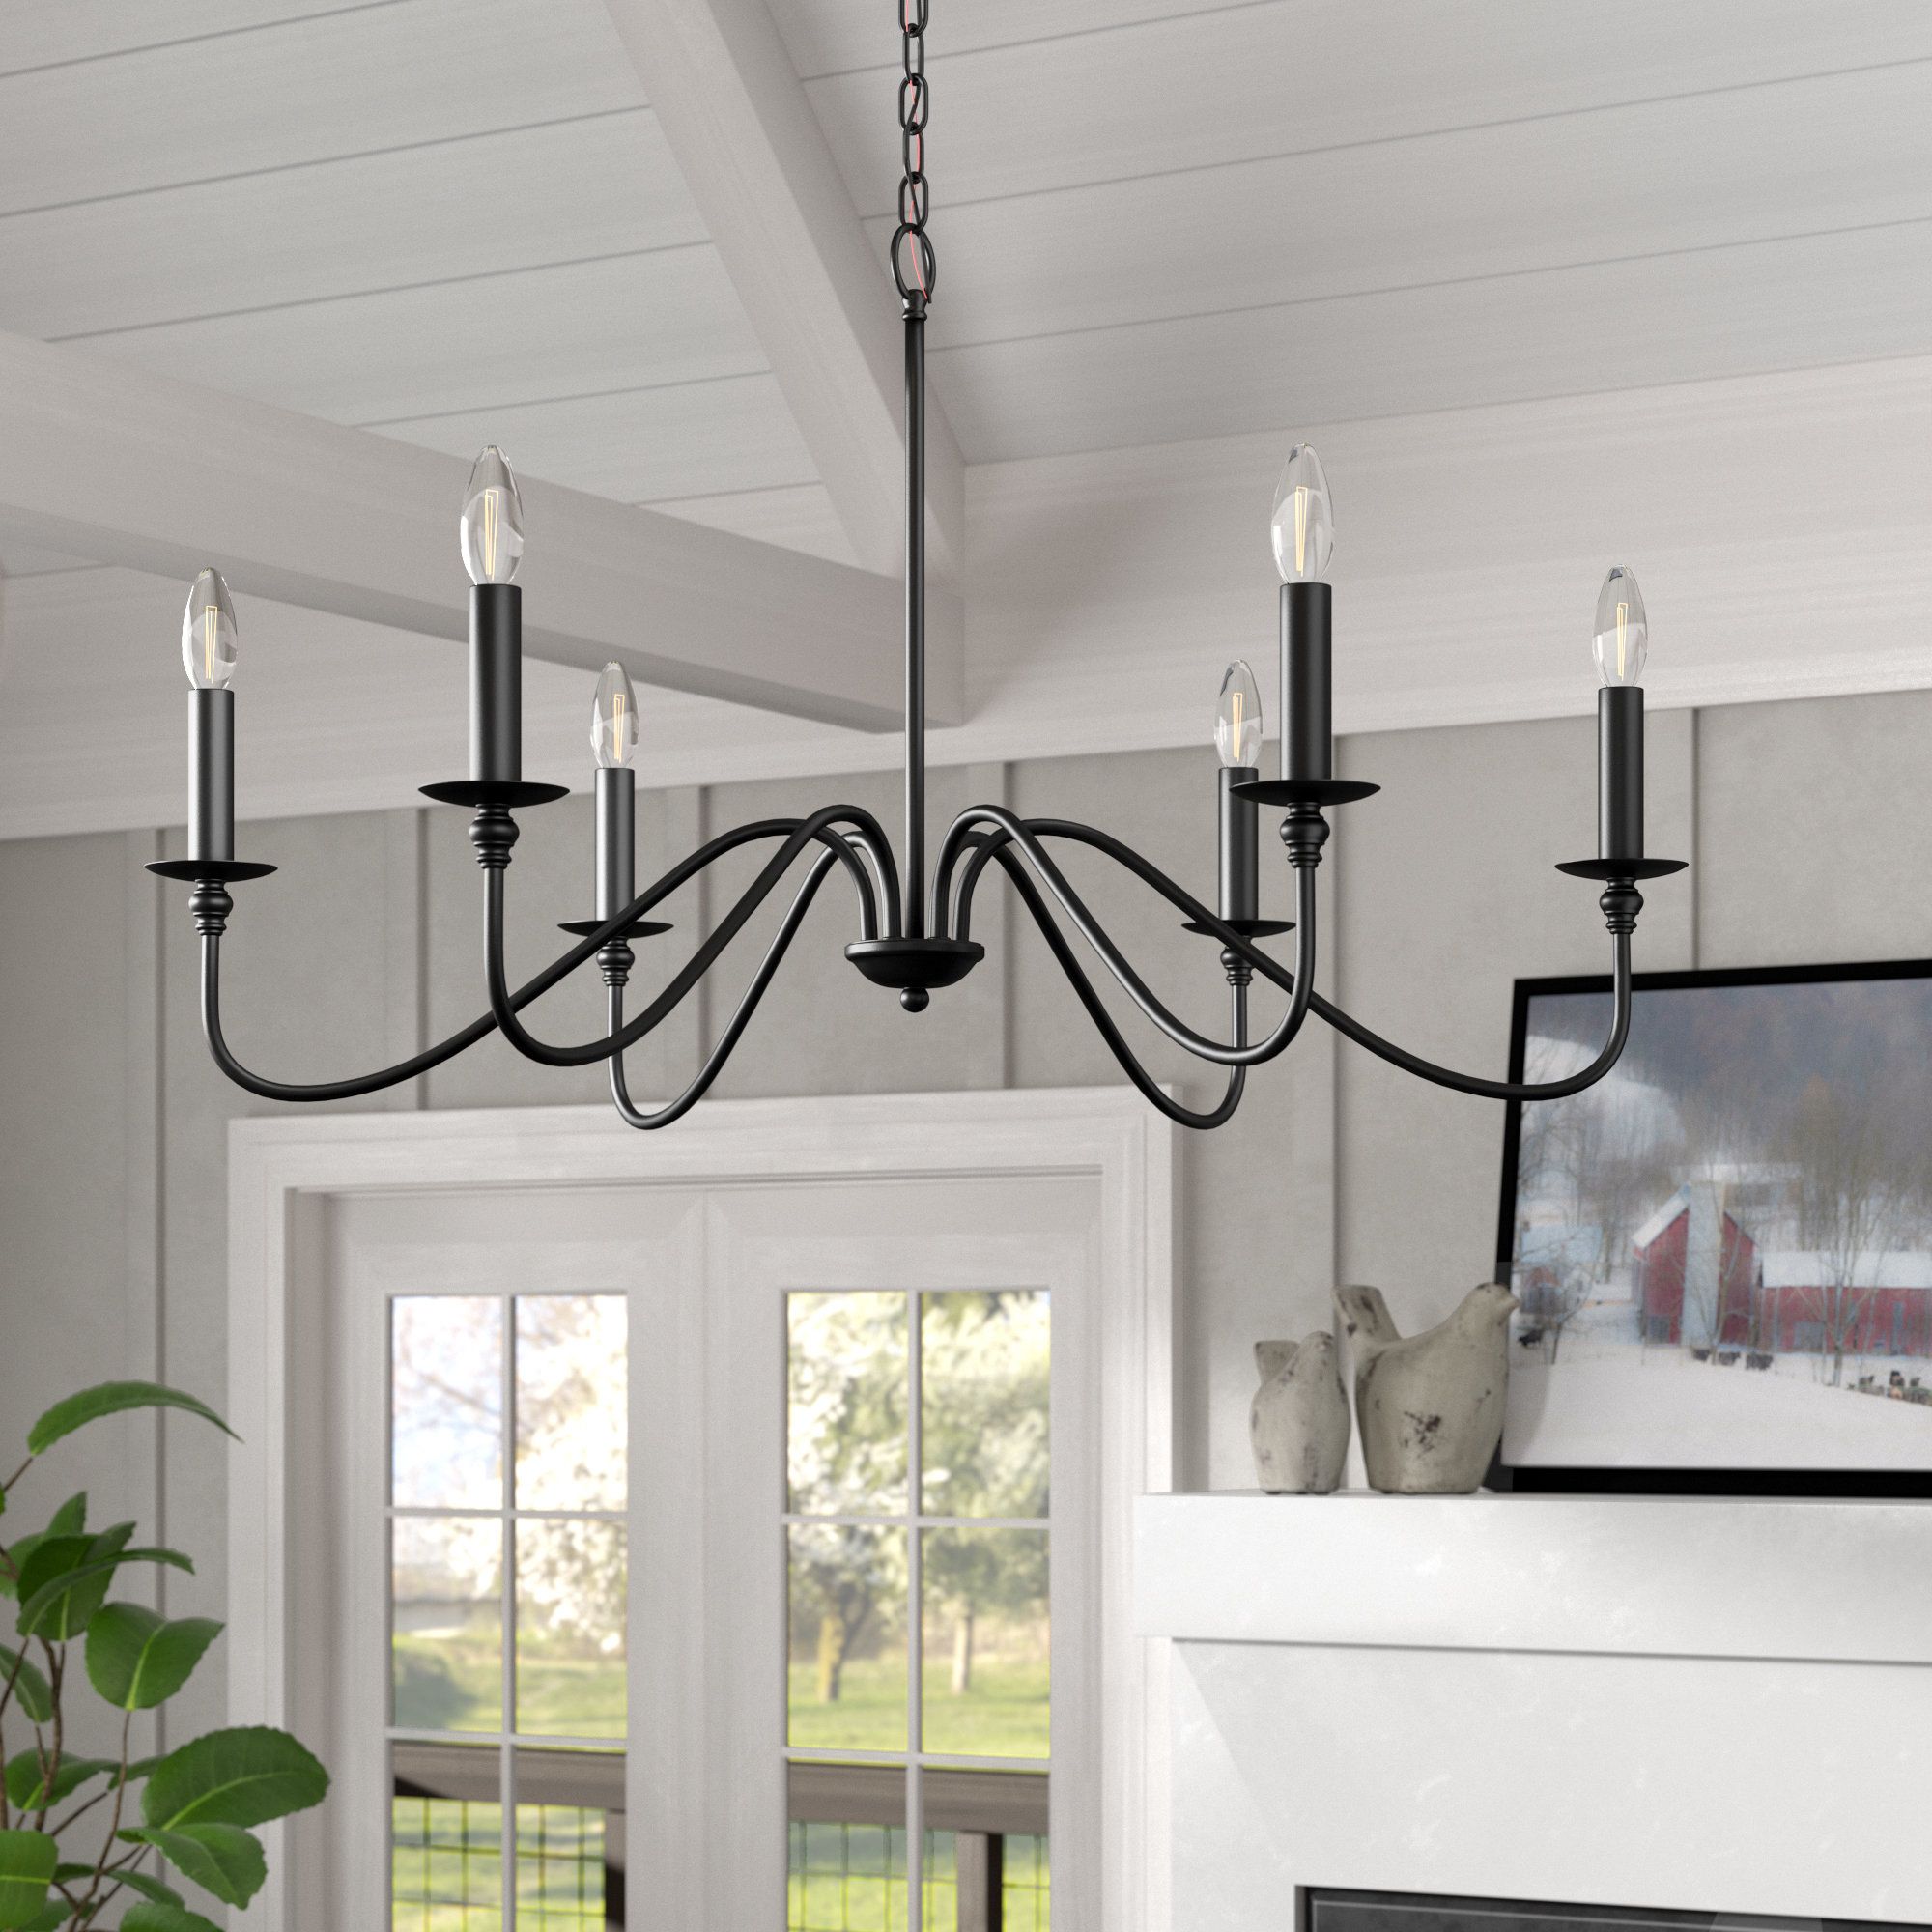 Hamza 6 Light Candle Style Chandelier Intended For Perseus 6 Light Candle Style Chandeliers (View 11 of 30)